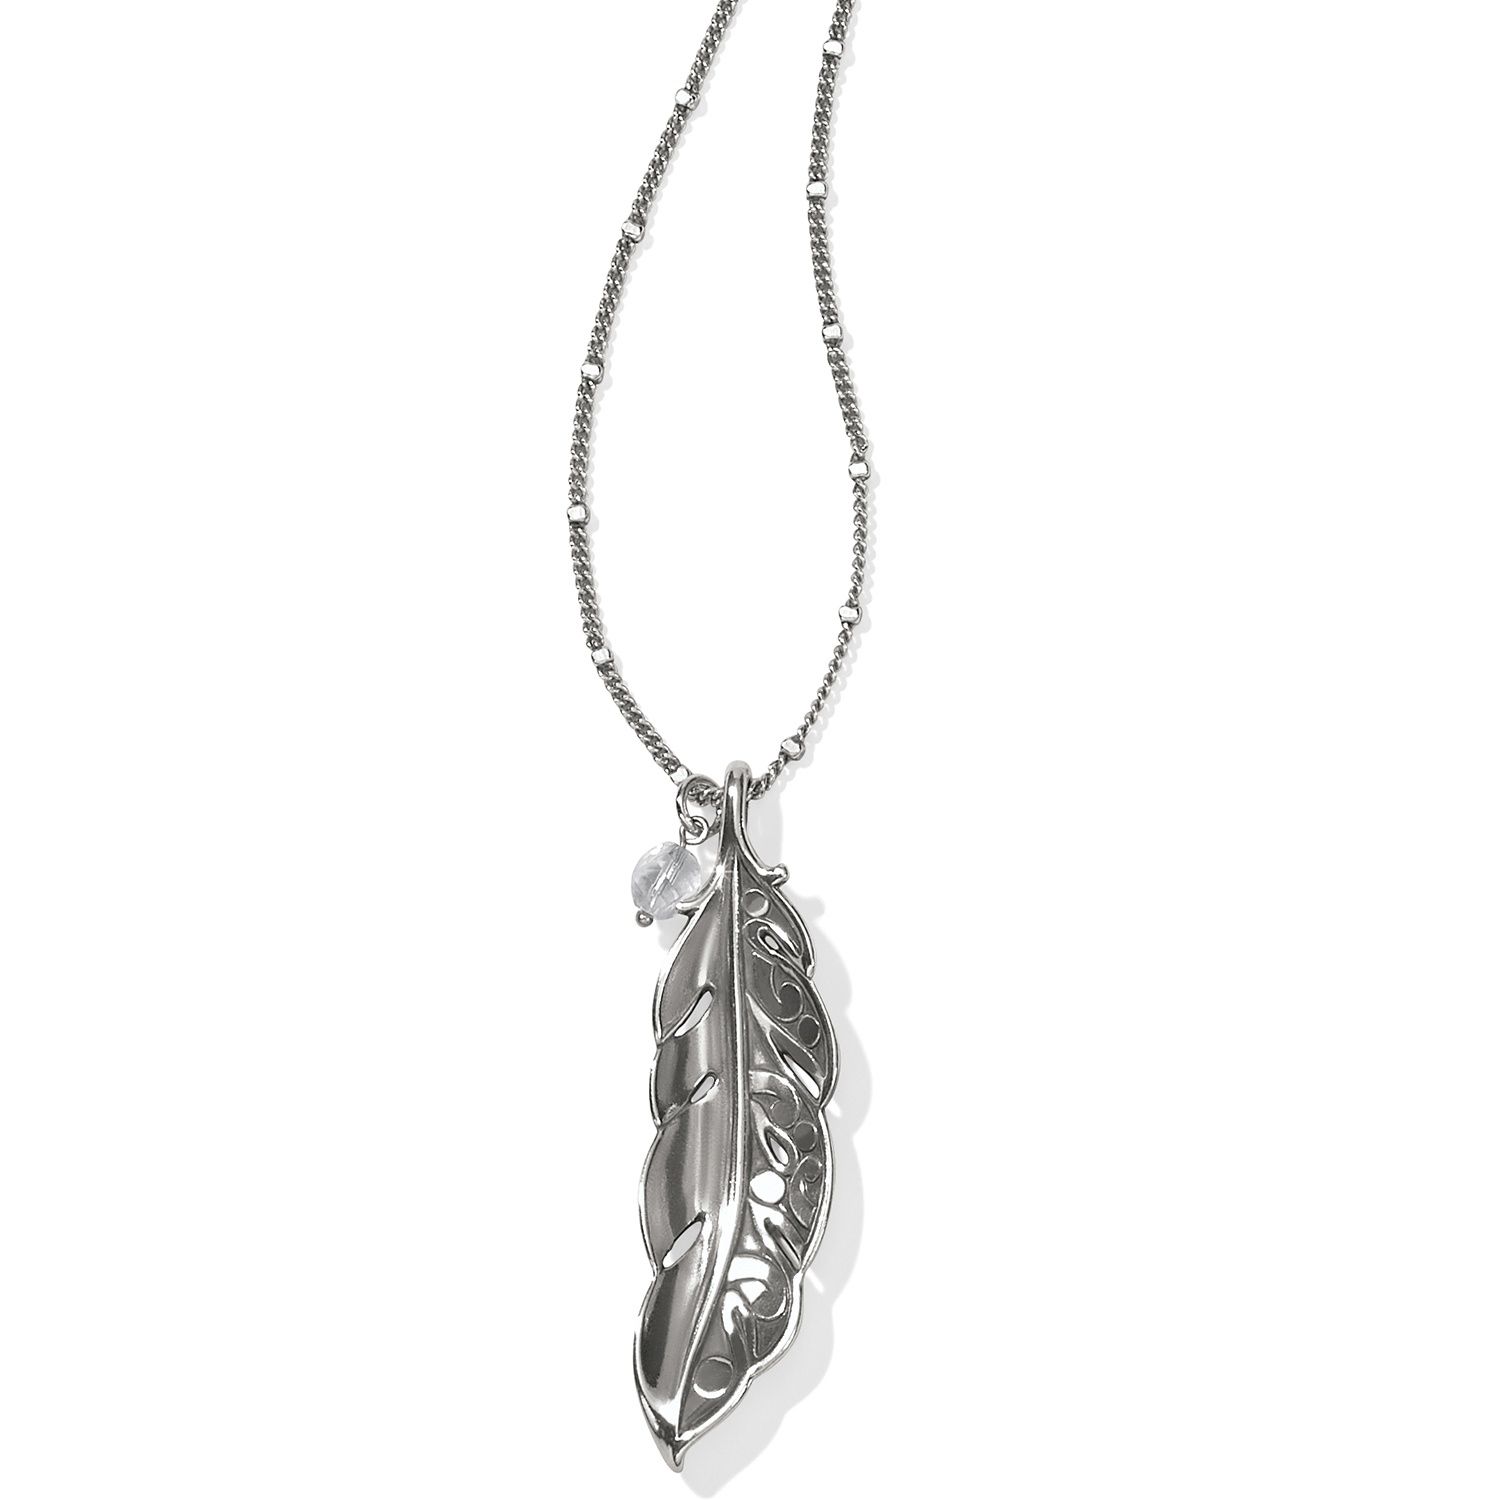 Contempo Ice Feather Convertible Reversible Necklace Pertaining To 2020 Shimmering Feather Pendant Necklaces (View 11 of 25)